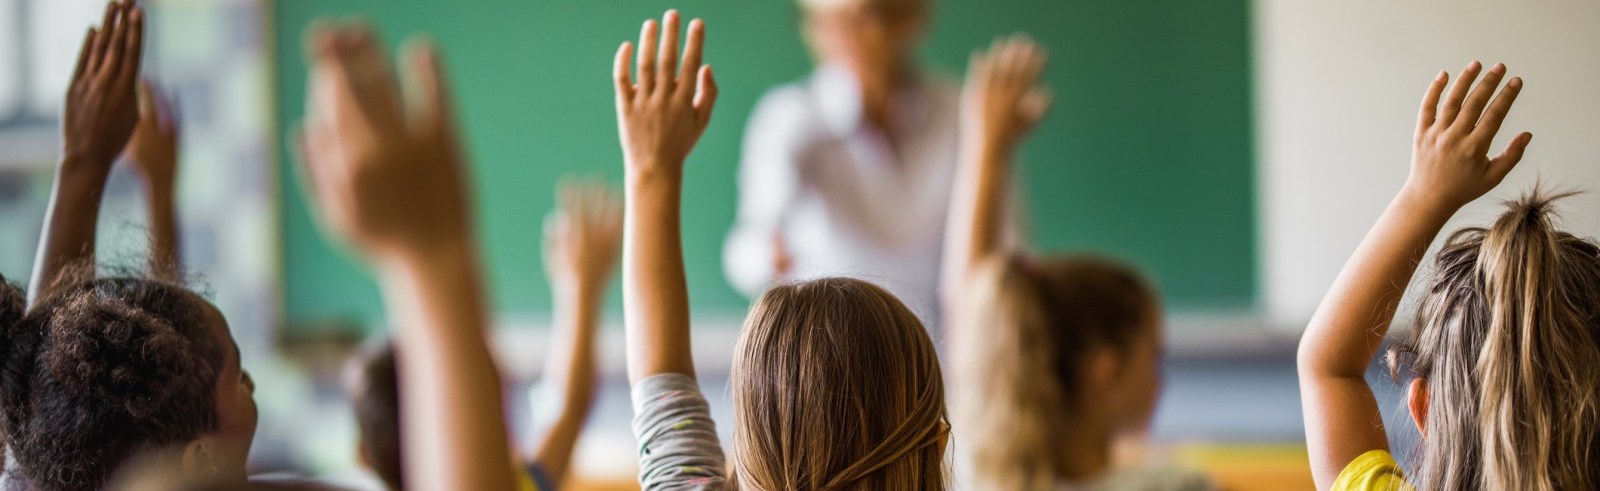 Children in a class room with their hands raised